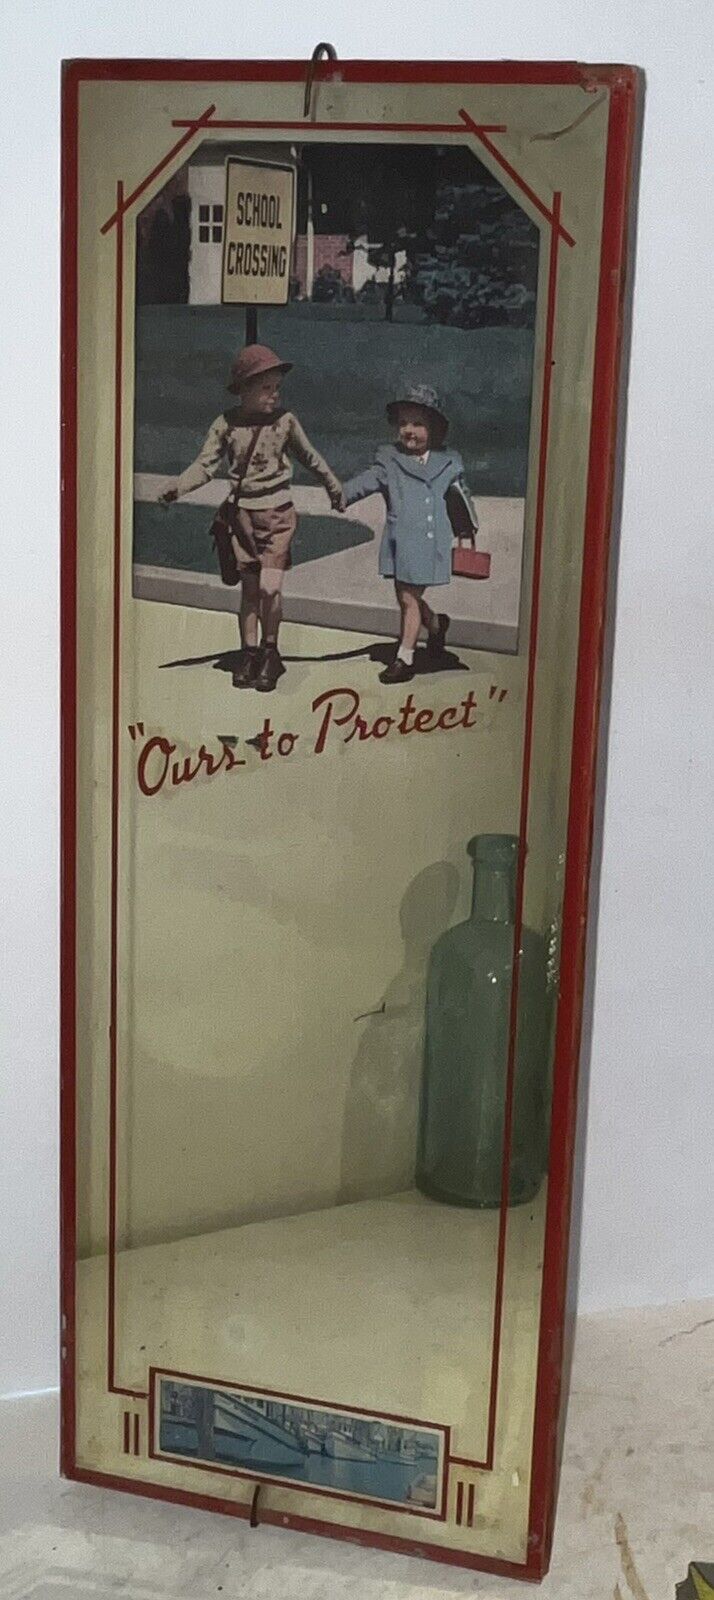 Vintage 1940s  “Ours to Protect” Mirror School Crossing Safety Advertising Sign